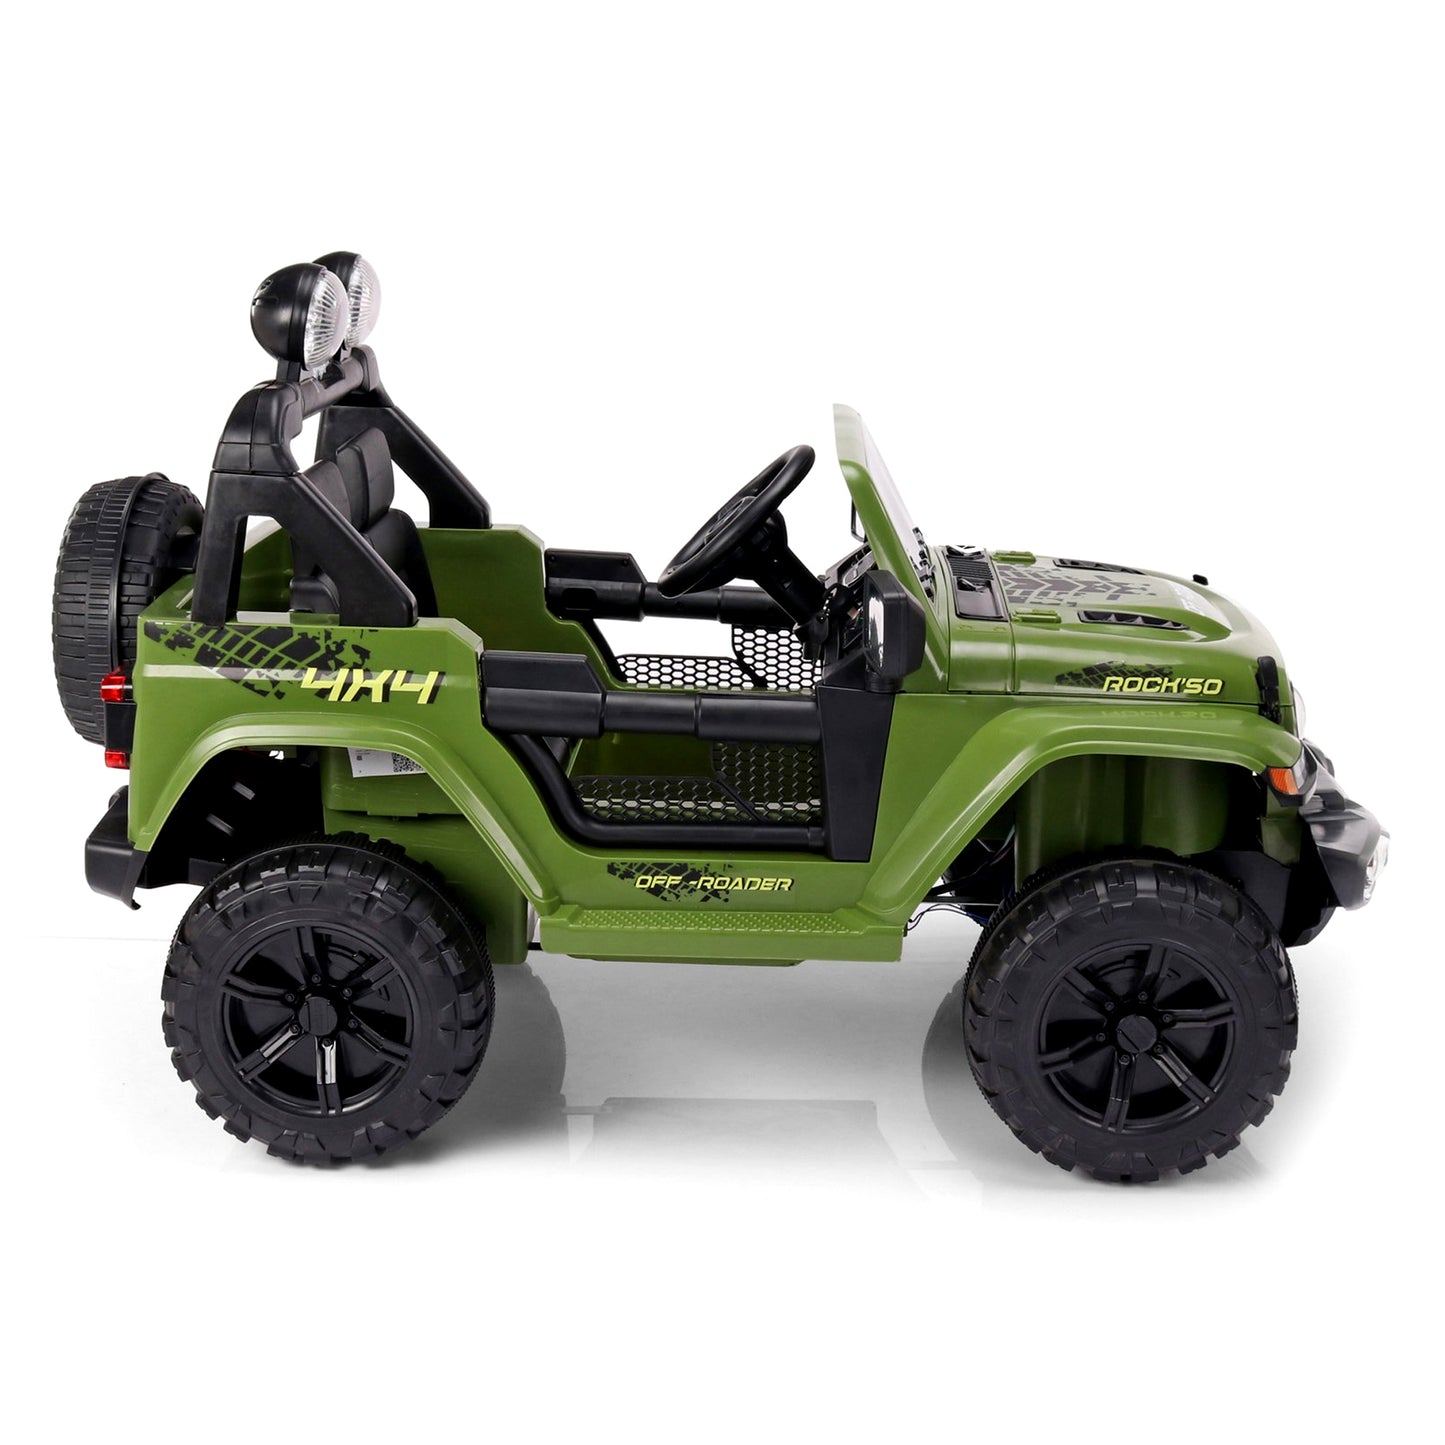 Tip Top Electric Jeep for Kids with Rechargeable Battery | Rideones for Girls & Boys Jeep Battery Operated Ride On